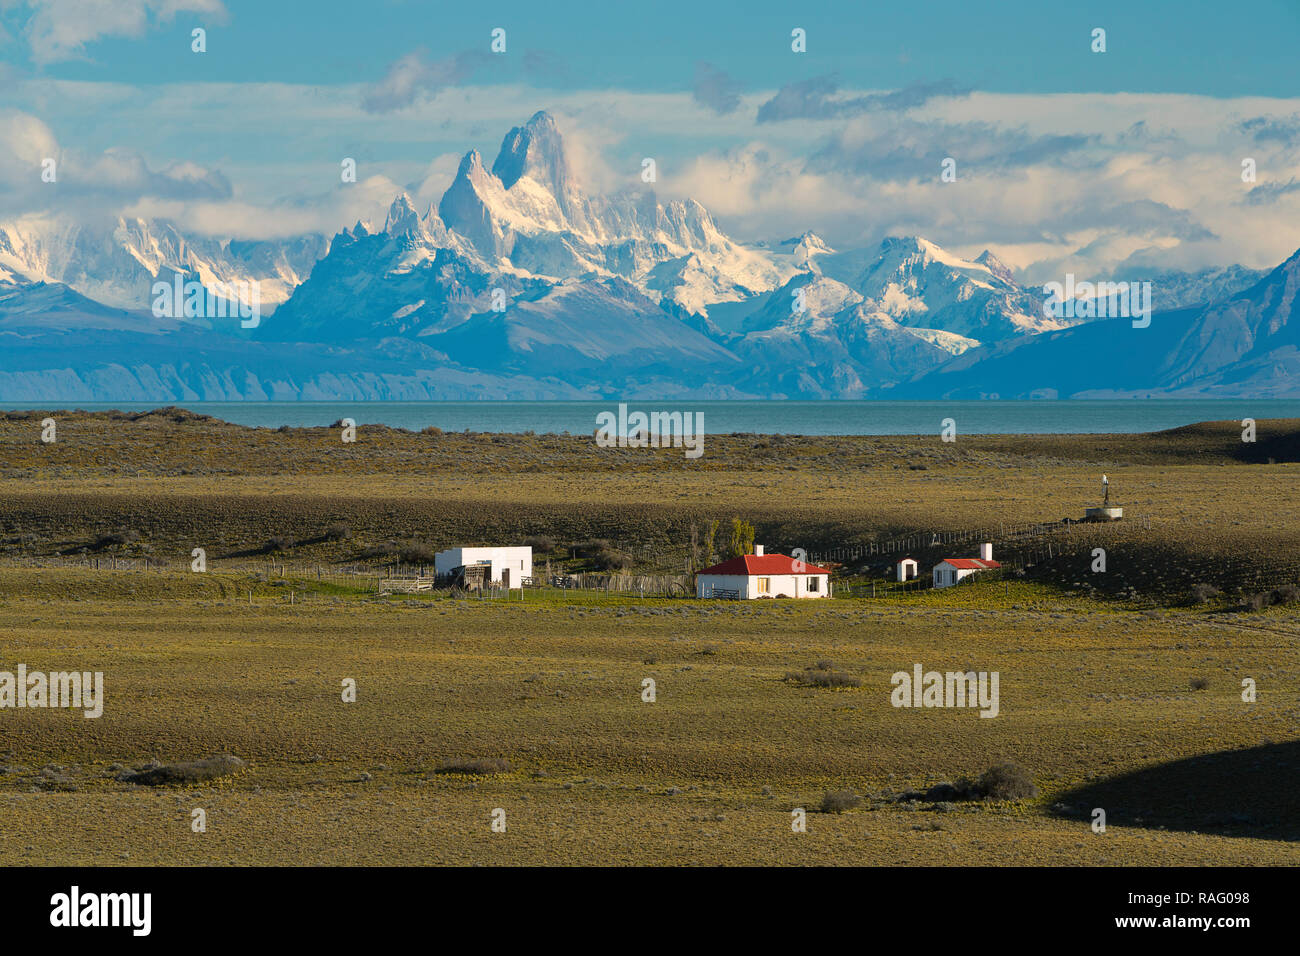 Mount Fitz Roy rises over a ranch in Patagonia in Argentina. Stock Photo